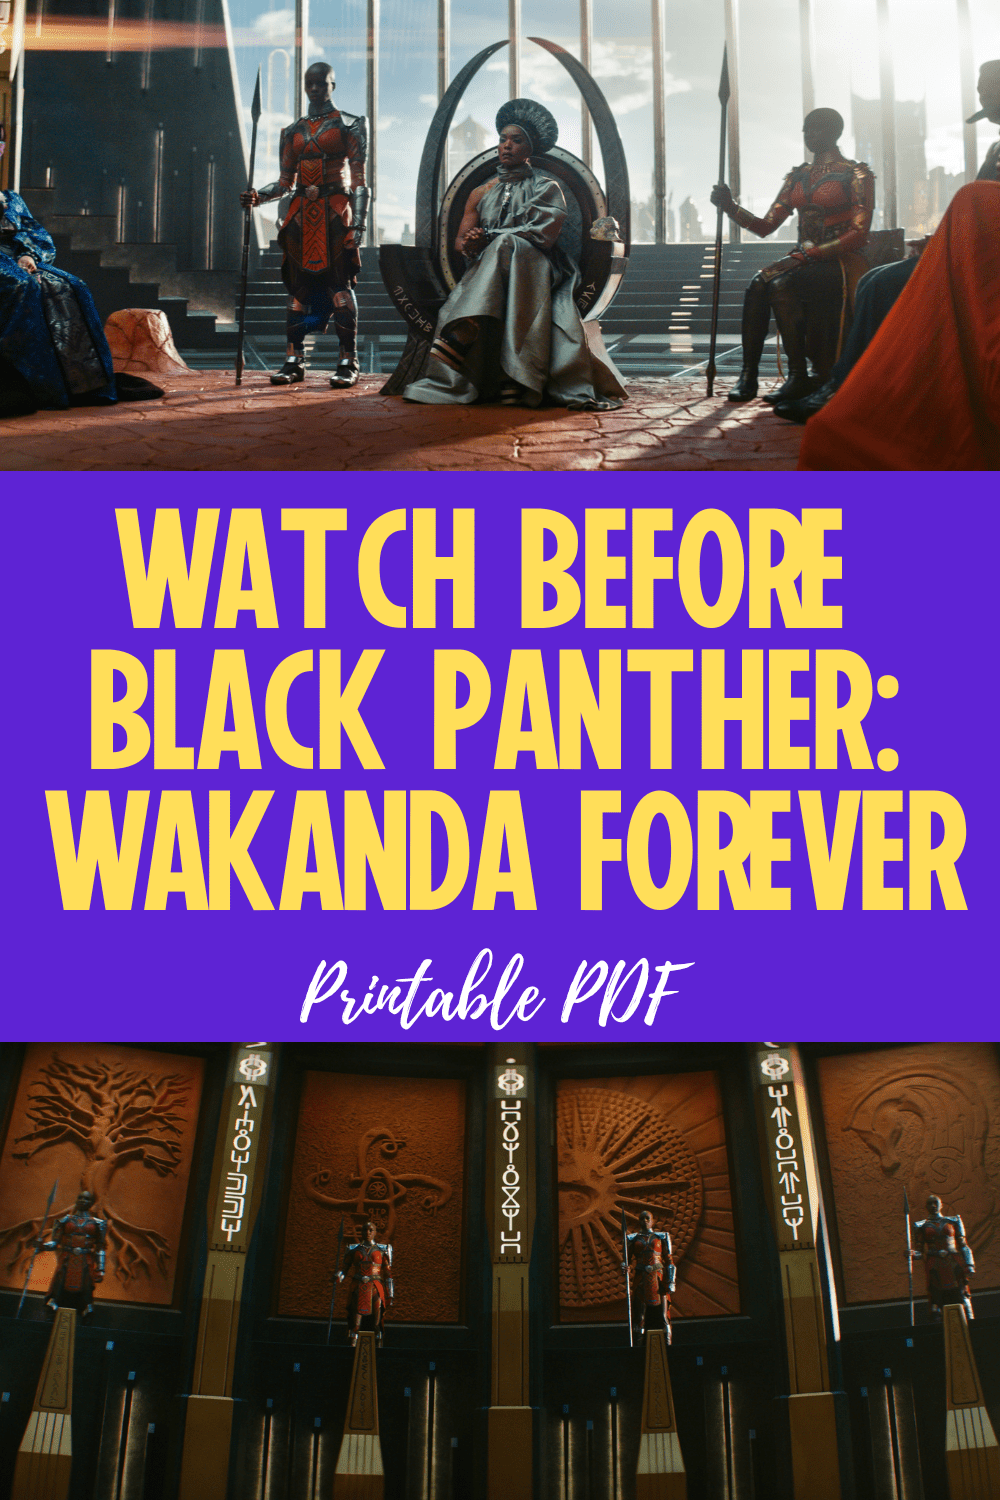 Marvel movies in order pdf: what to watch before Black Panther: Wakanda Forever.